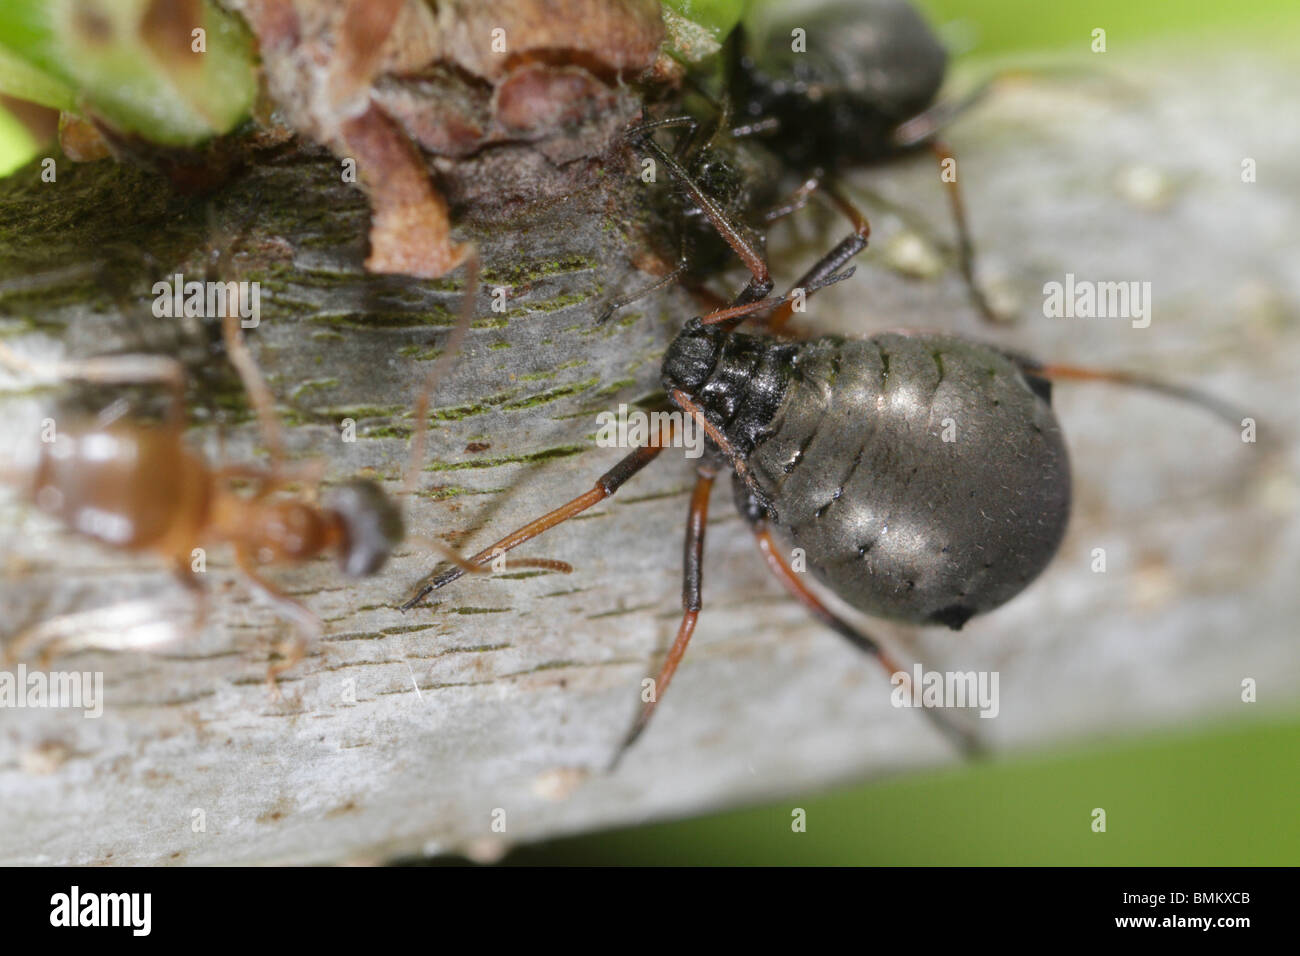 Adult Lachnus roboris aphid on an oak tree, tended to by Black Garden Ants (Lasius niger) Stock Photo